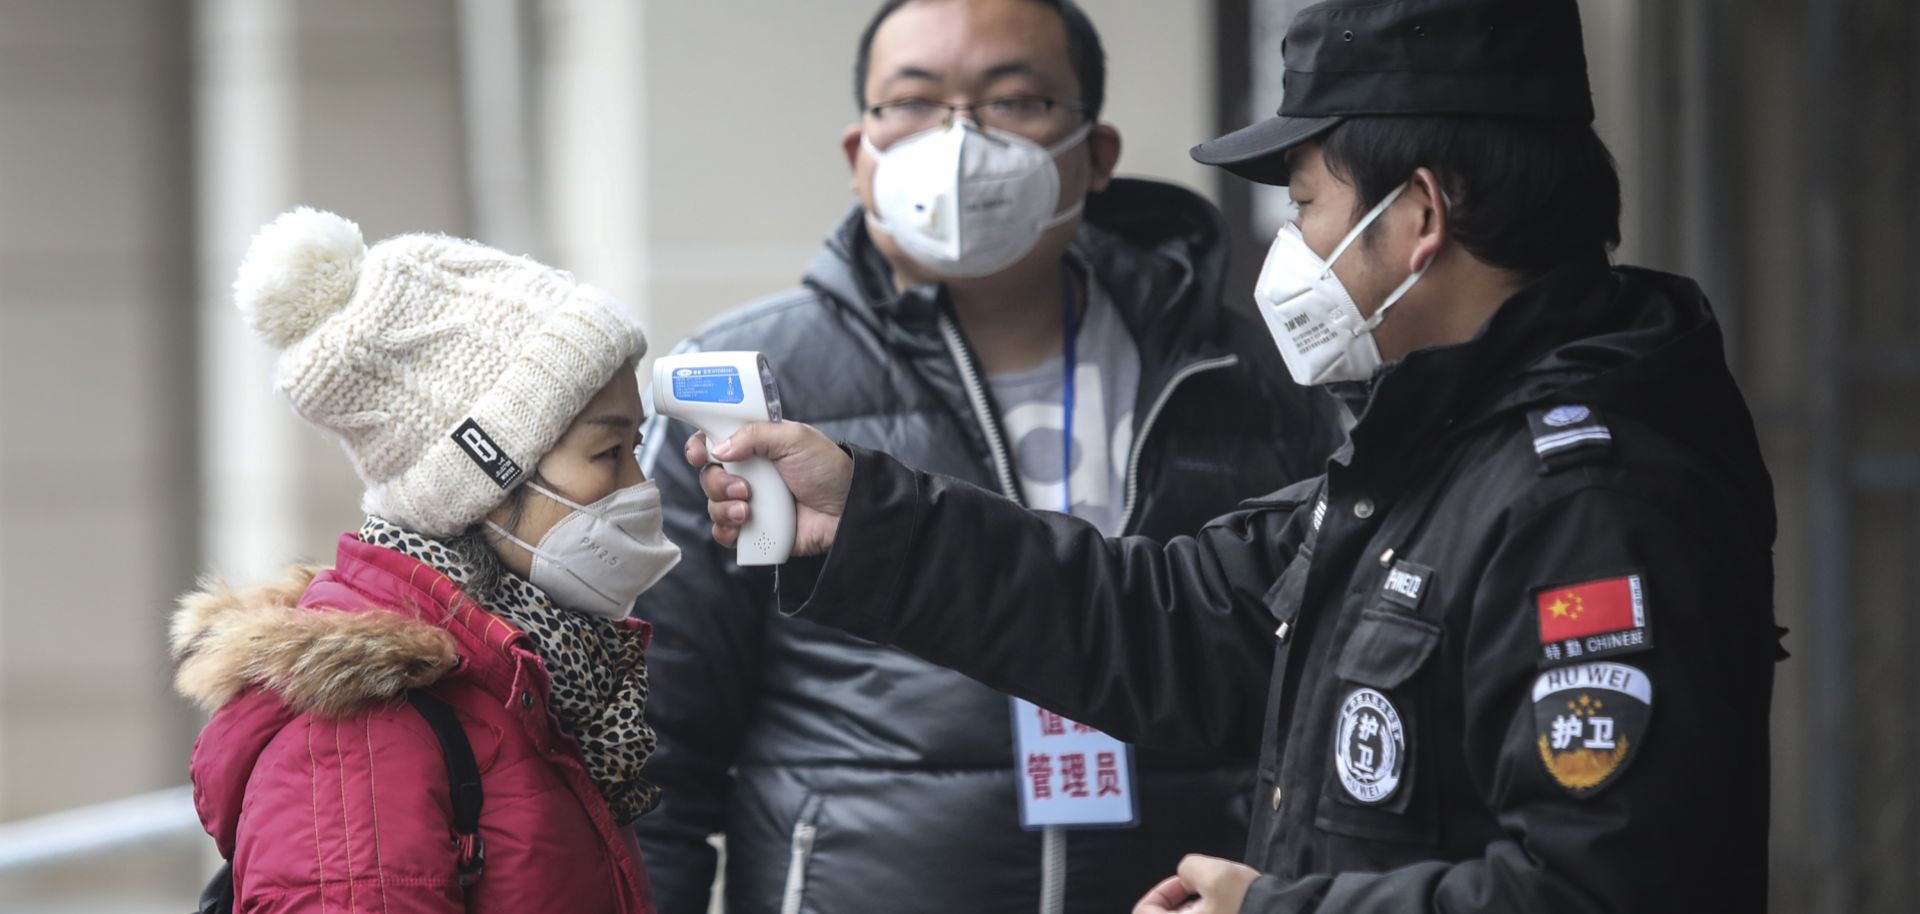 Authorities in Wuhan, China, check the temperature of a passenger at a wharf on the Yangtze River on Jan. 22, 2020.